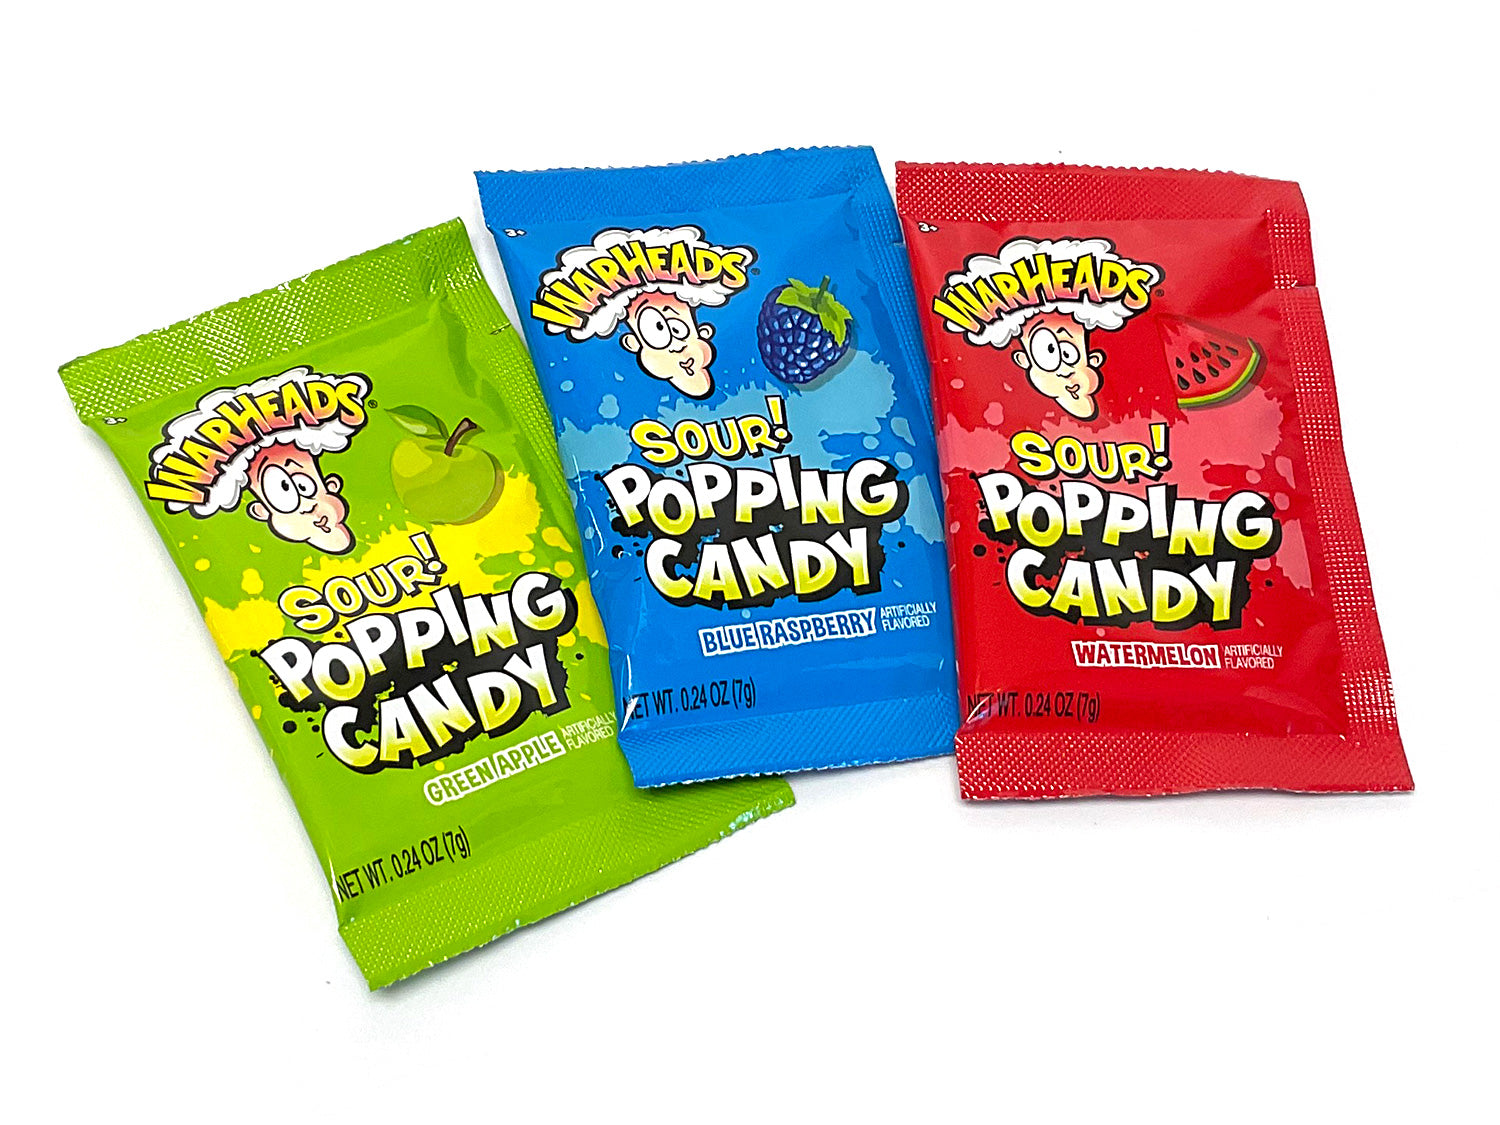 Warheads Sour Popping Candy - 3-pack open